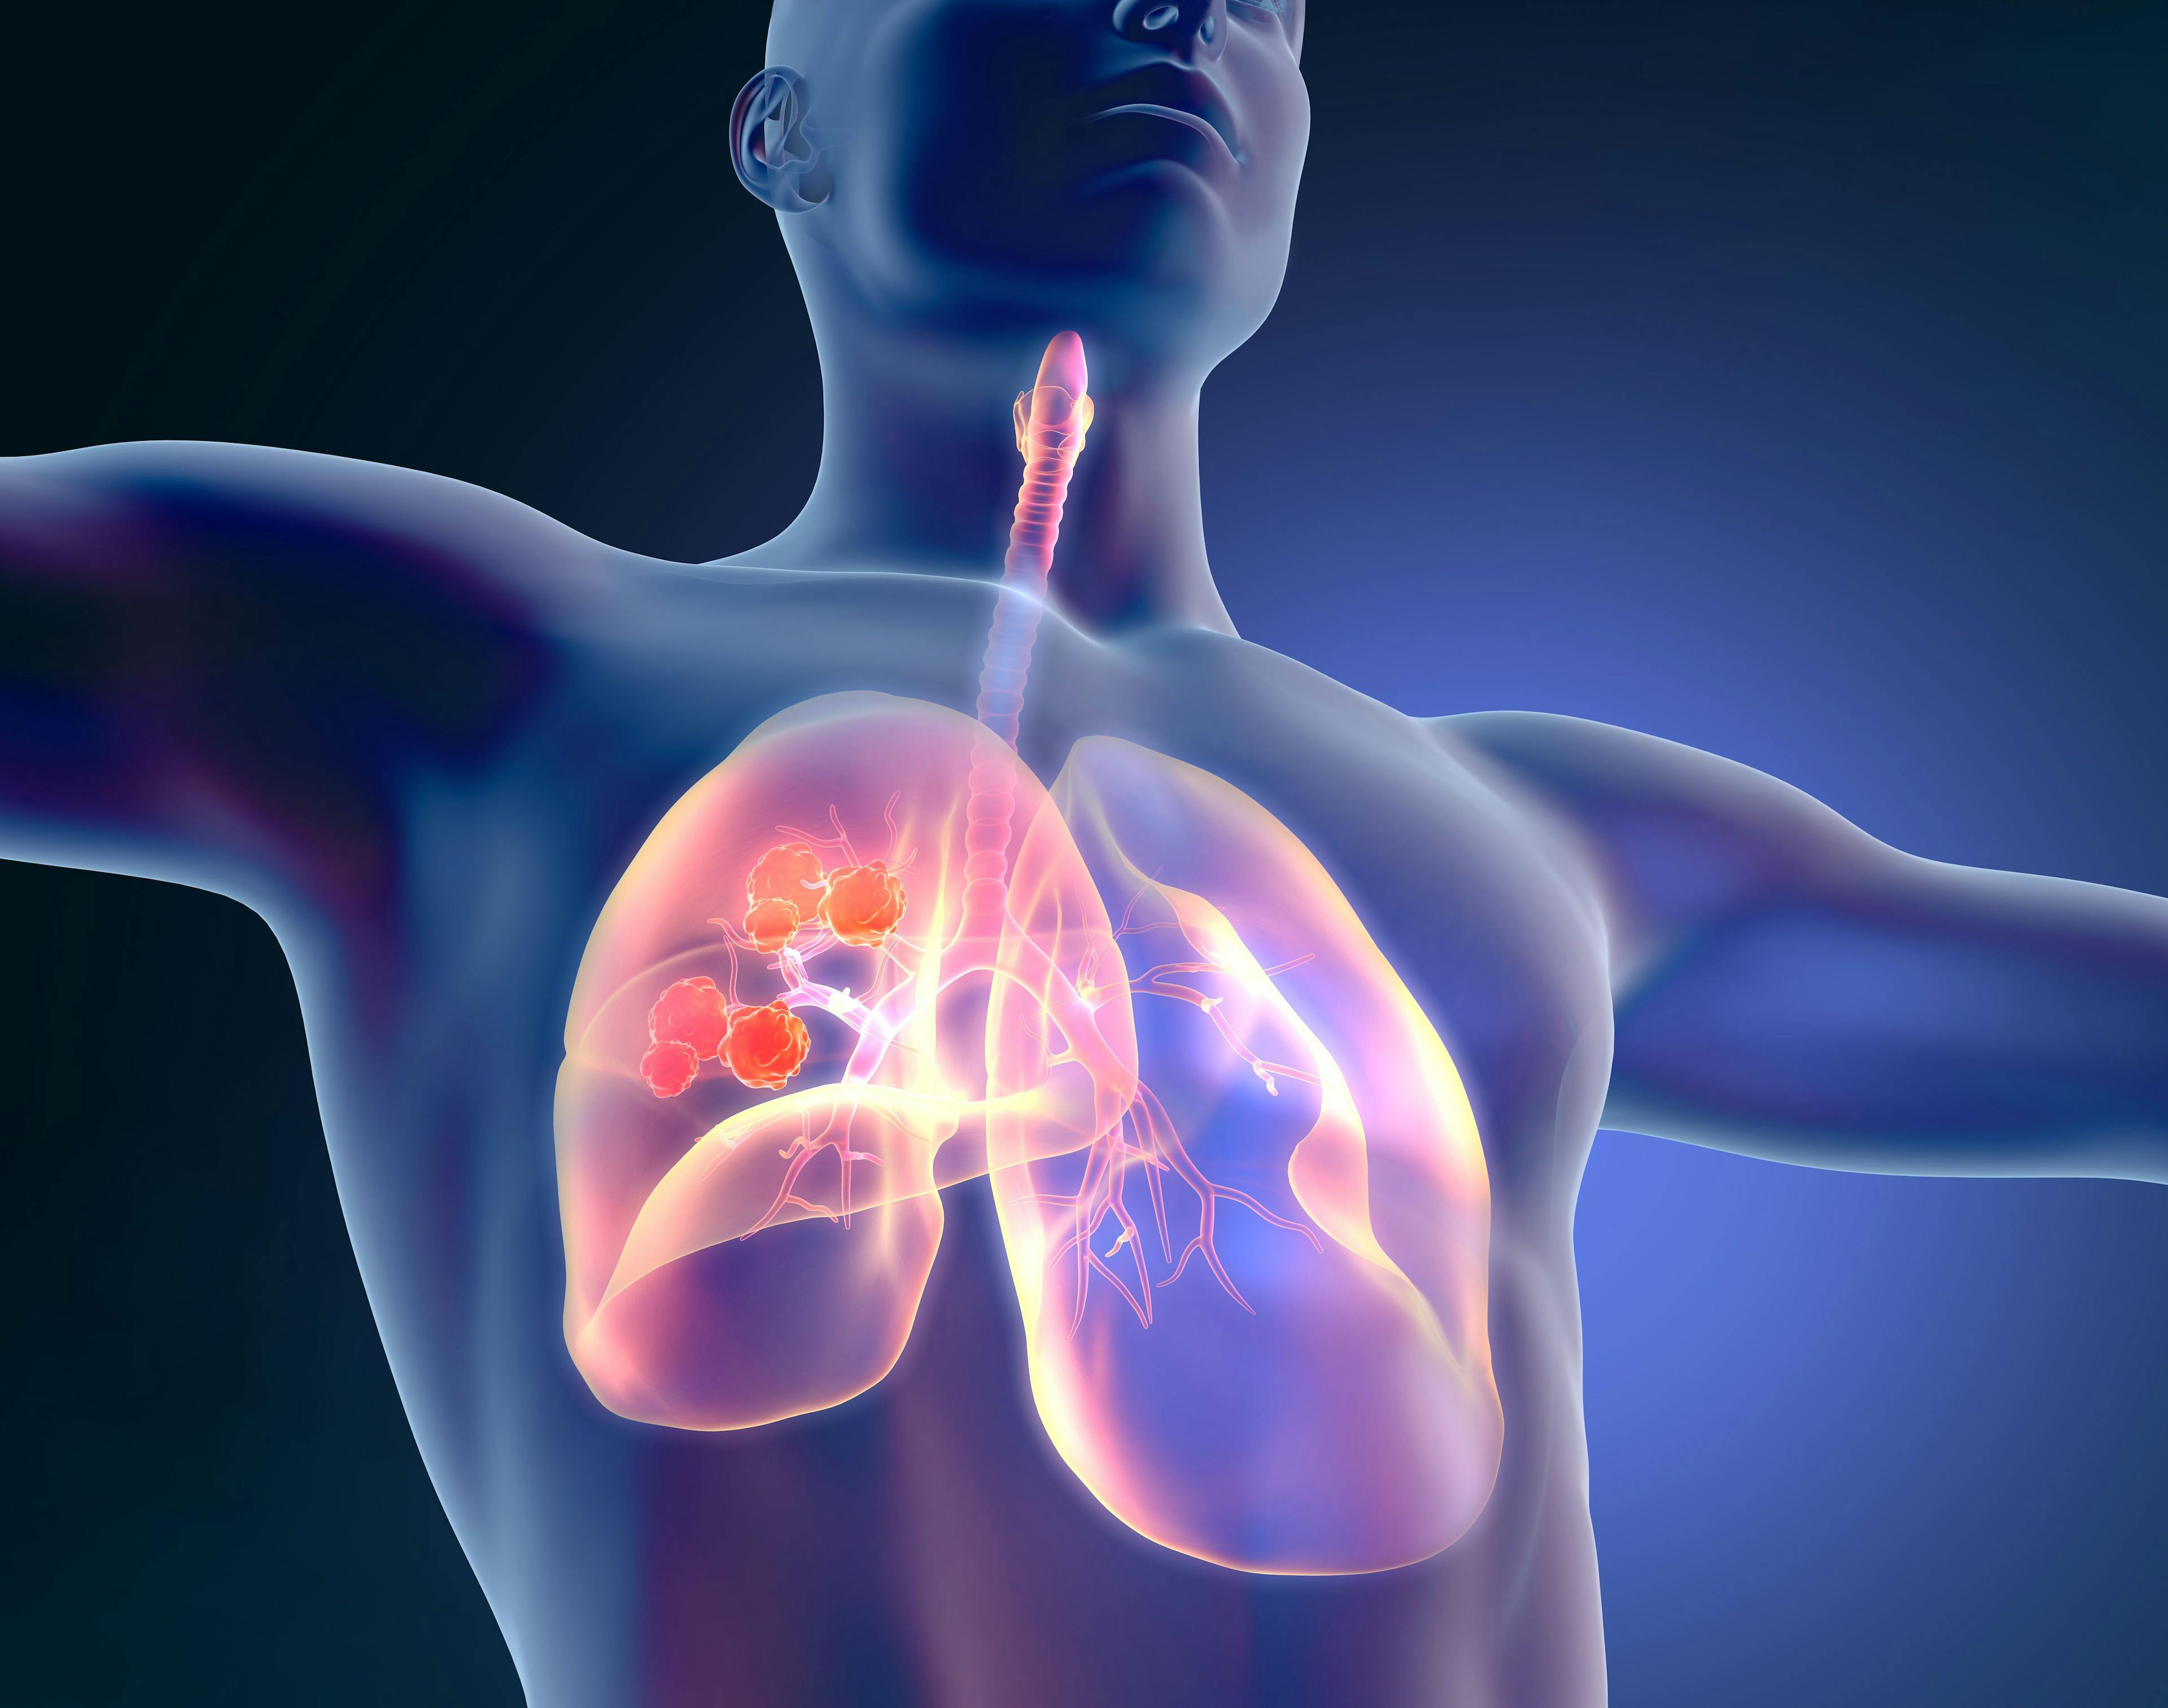 Targeted Therapies Move Forward in Oncogene-Driven Lung Cancer